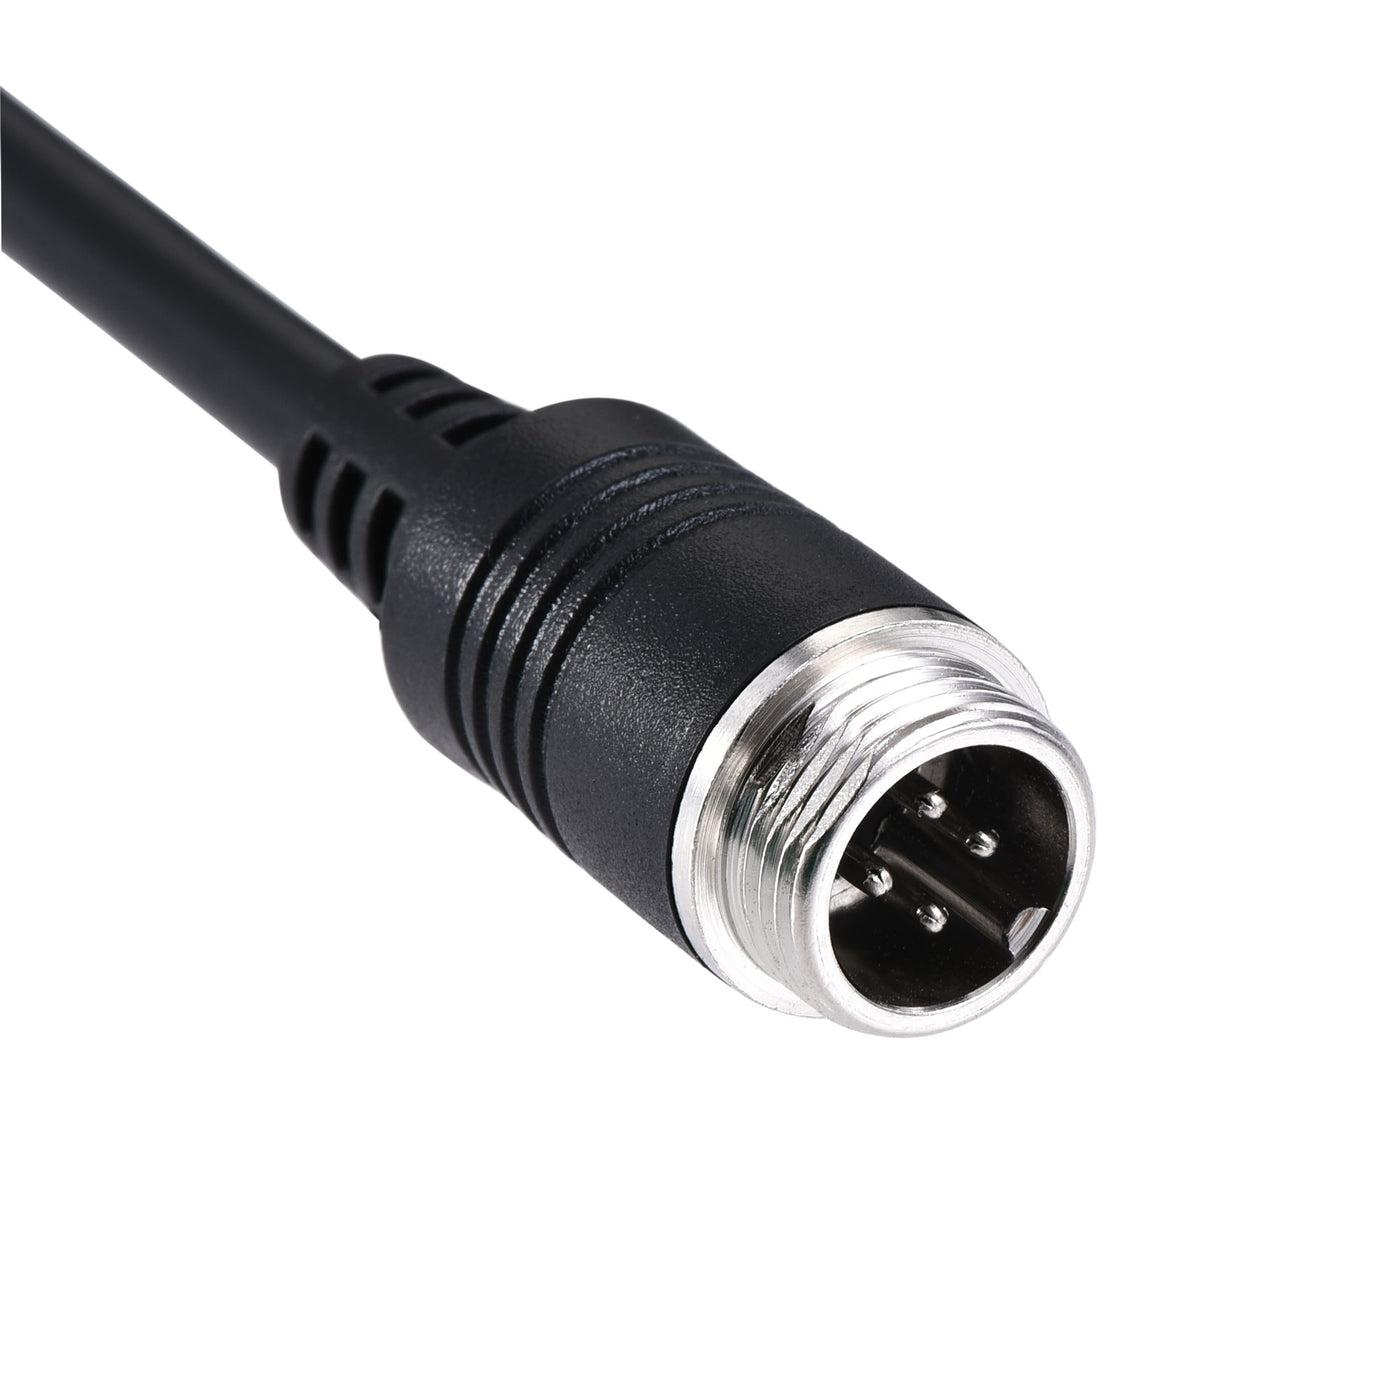 Uxcell Uxcell Video Aviation Cable 4-Pin 6.56FT 2M Male to Female Extension Cable